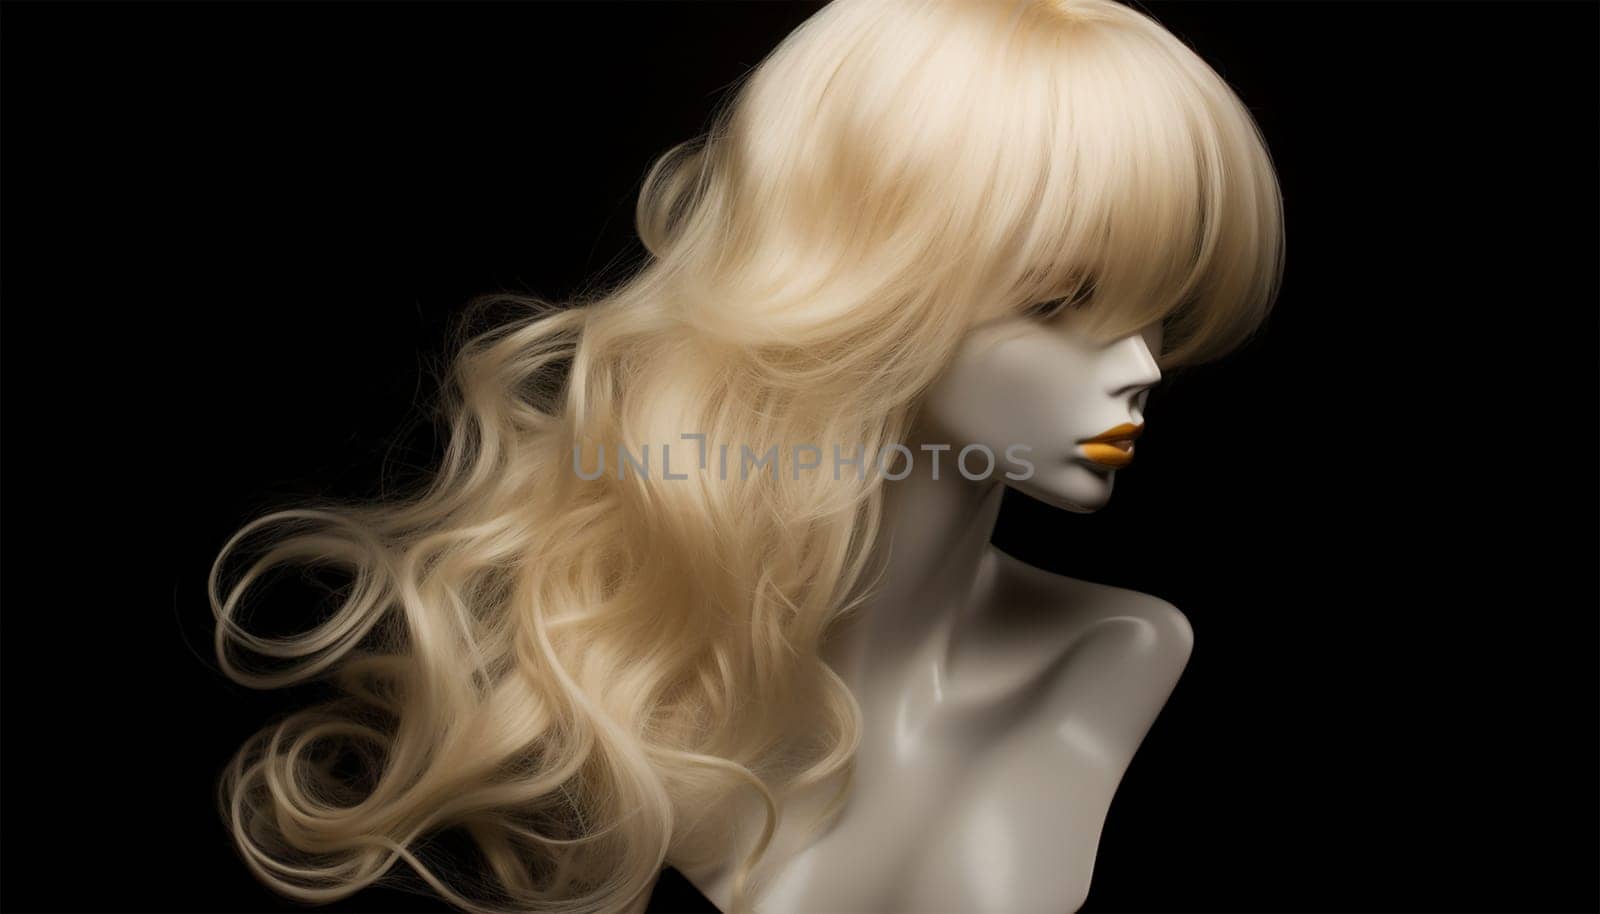 Natural looking blonde wig on white mannequin head. Long hair on the plastic wig holder isolated on black background, front view woman design by Annebel146